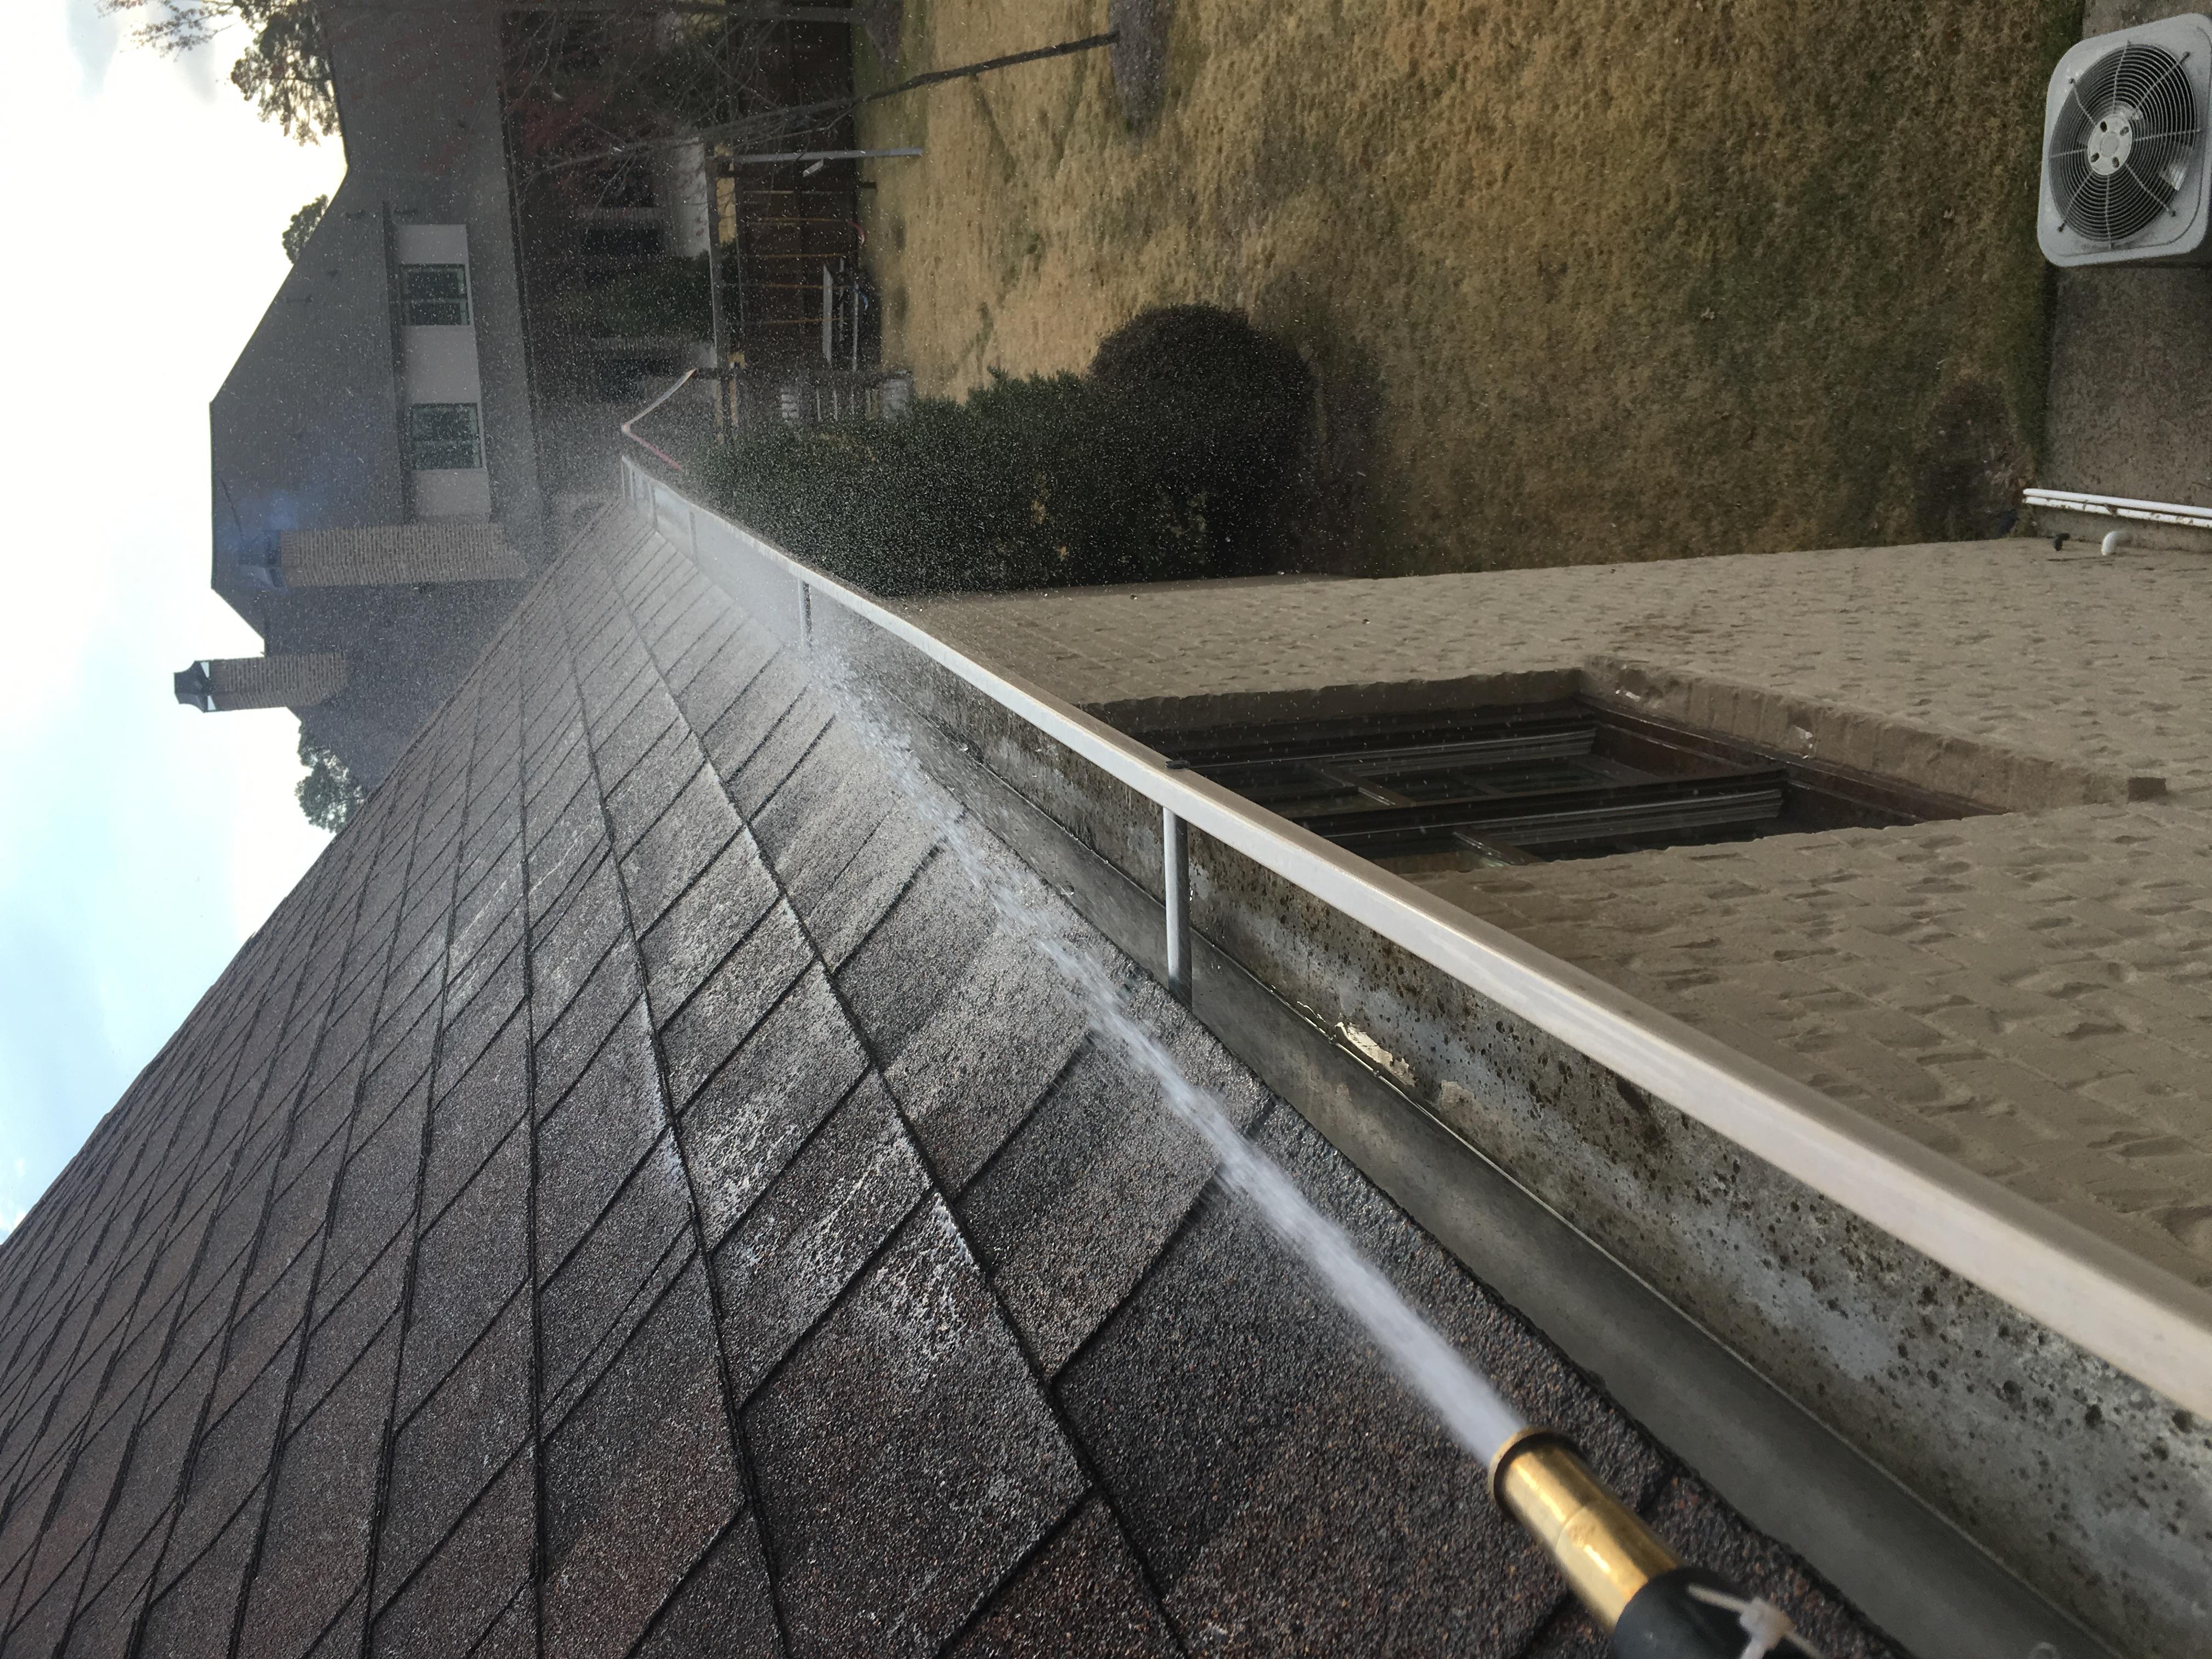 Gutter-Cleaners-In-St.-Louis-MO-63171.jpg